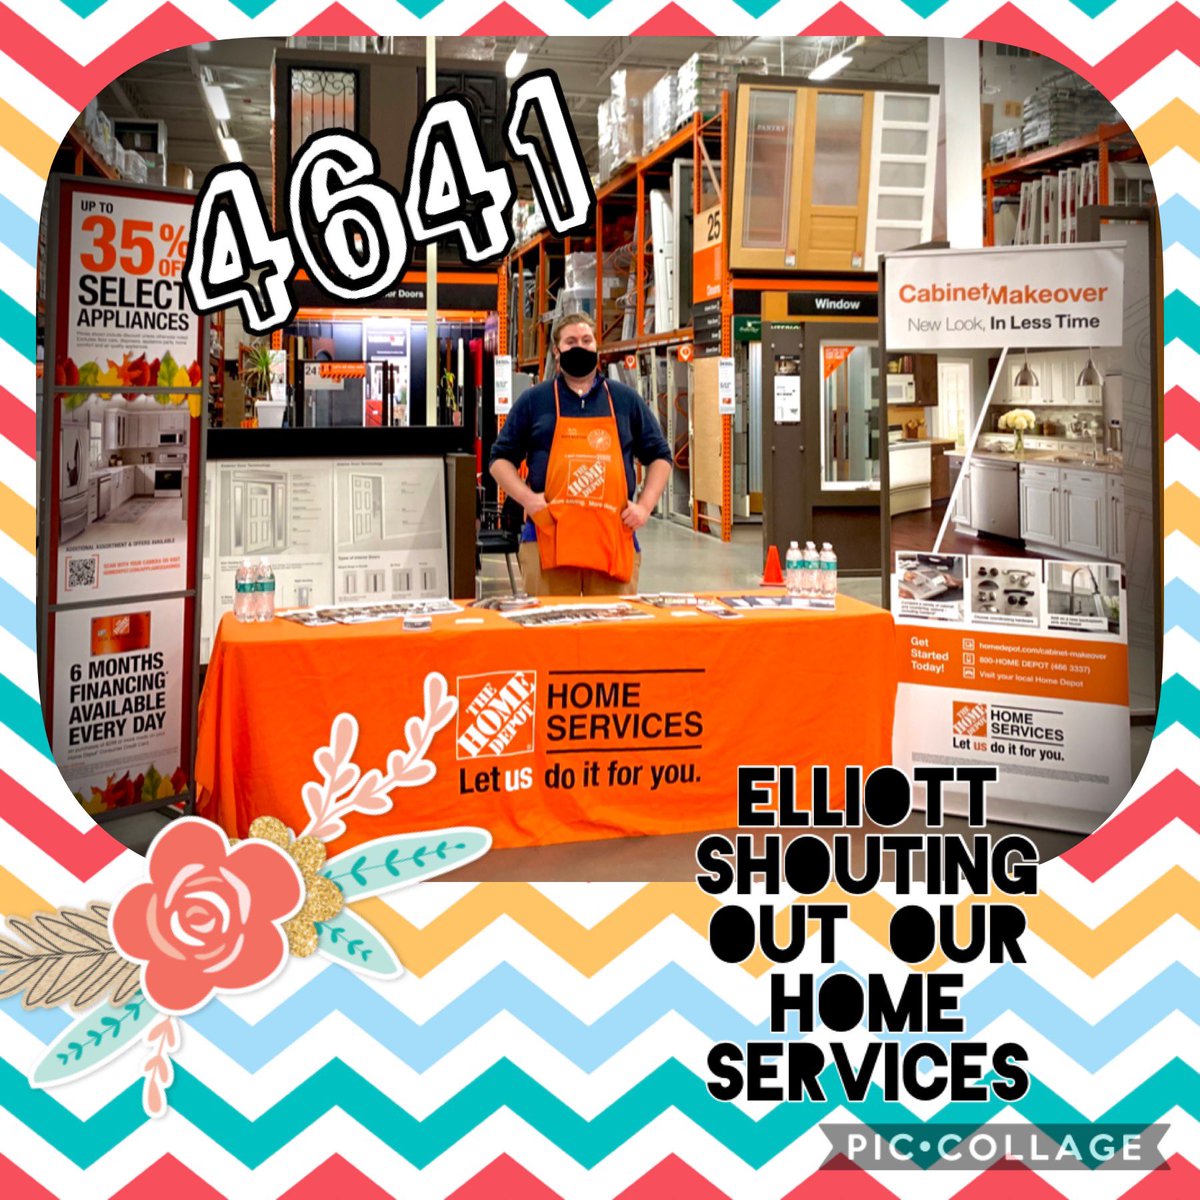 Elliot holding down our Home service table!!#HomeDepotstrong #D278orangeproud @CollazoH @PaulDeveno @JDorseyTHD @AnyaeBell @poolesville_97 @jjbass4641 @compaq2611 @THDBeniDervishi @ChrisTHD4641 @cunderwood605 @Behiredin_Seyd